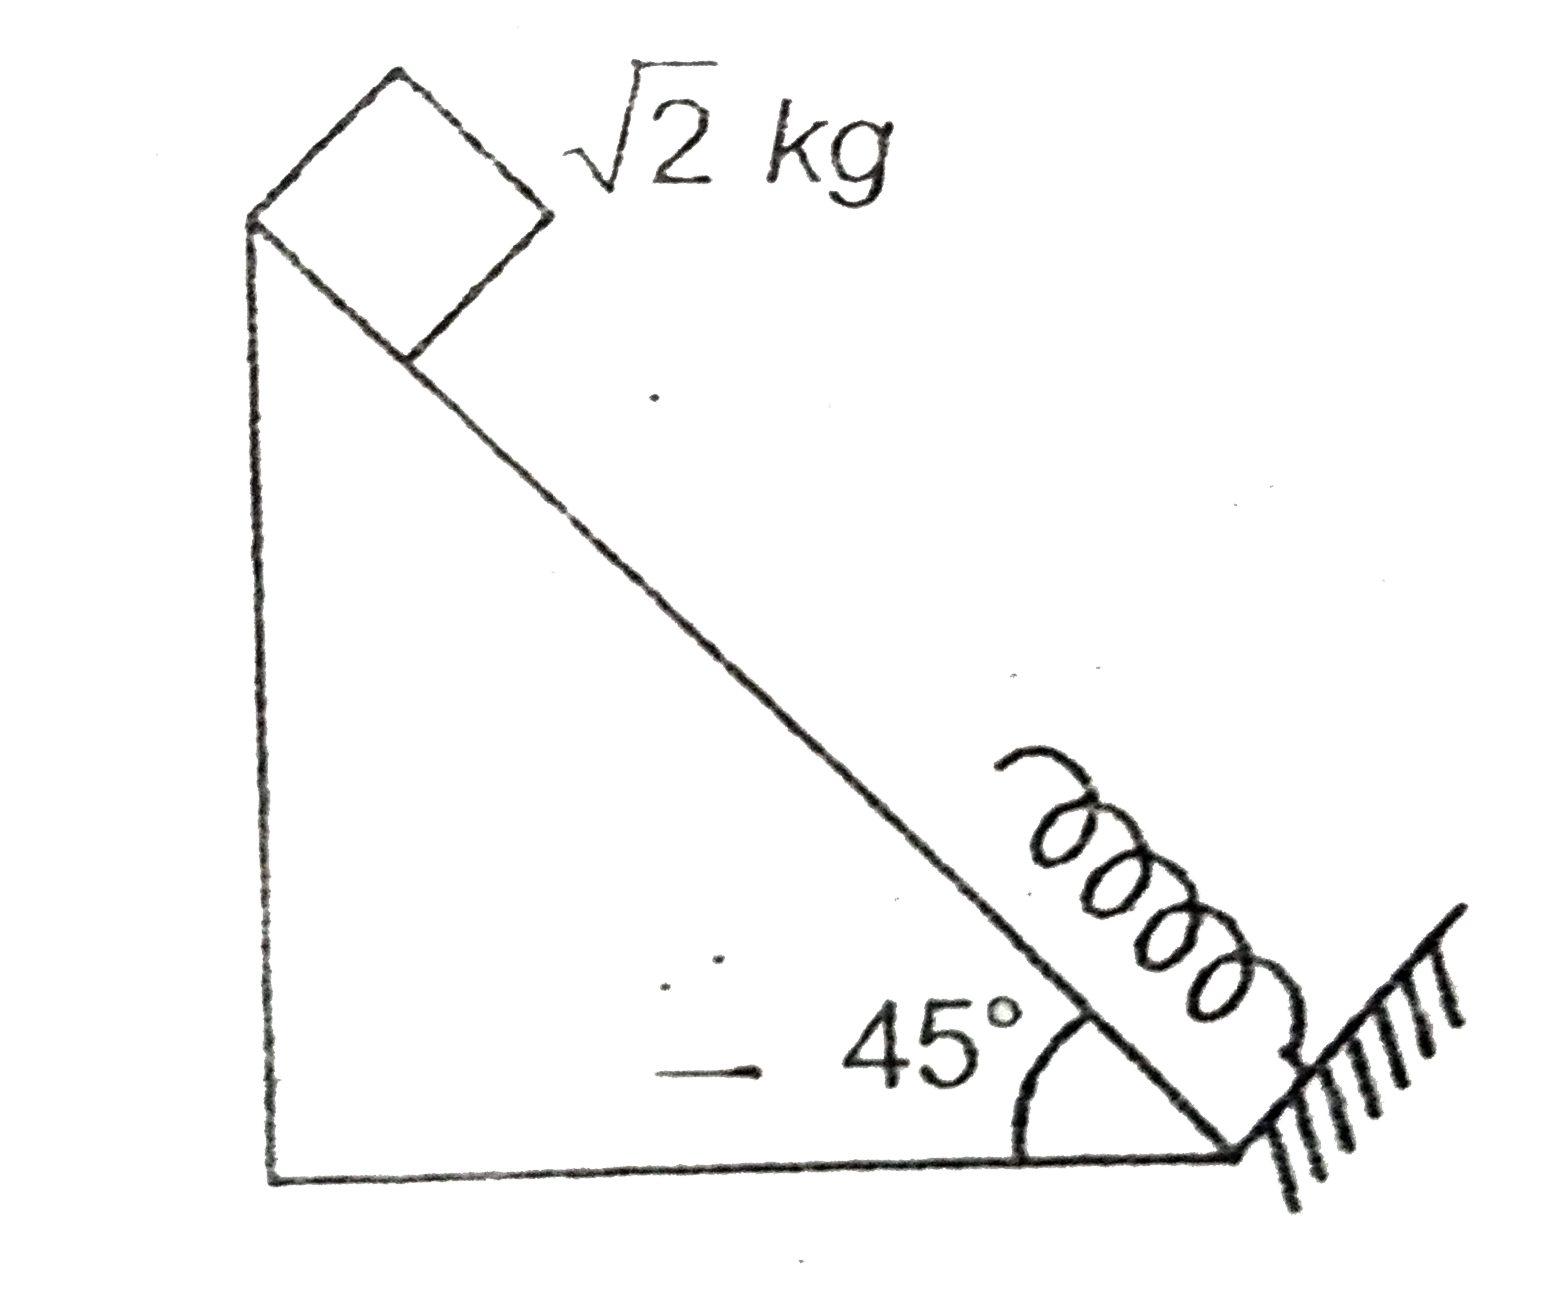 A block of mass sqrt2 kg is released from the top of an inclined smooth surface as shown in fighre. If spring constant of spring is 100 N/m and block comes to rest after compressing the spring by 1 m, then the distance travelled by block befor it comes to rest is